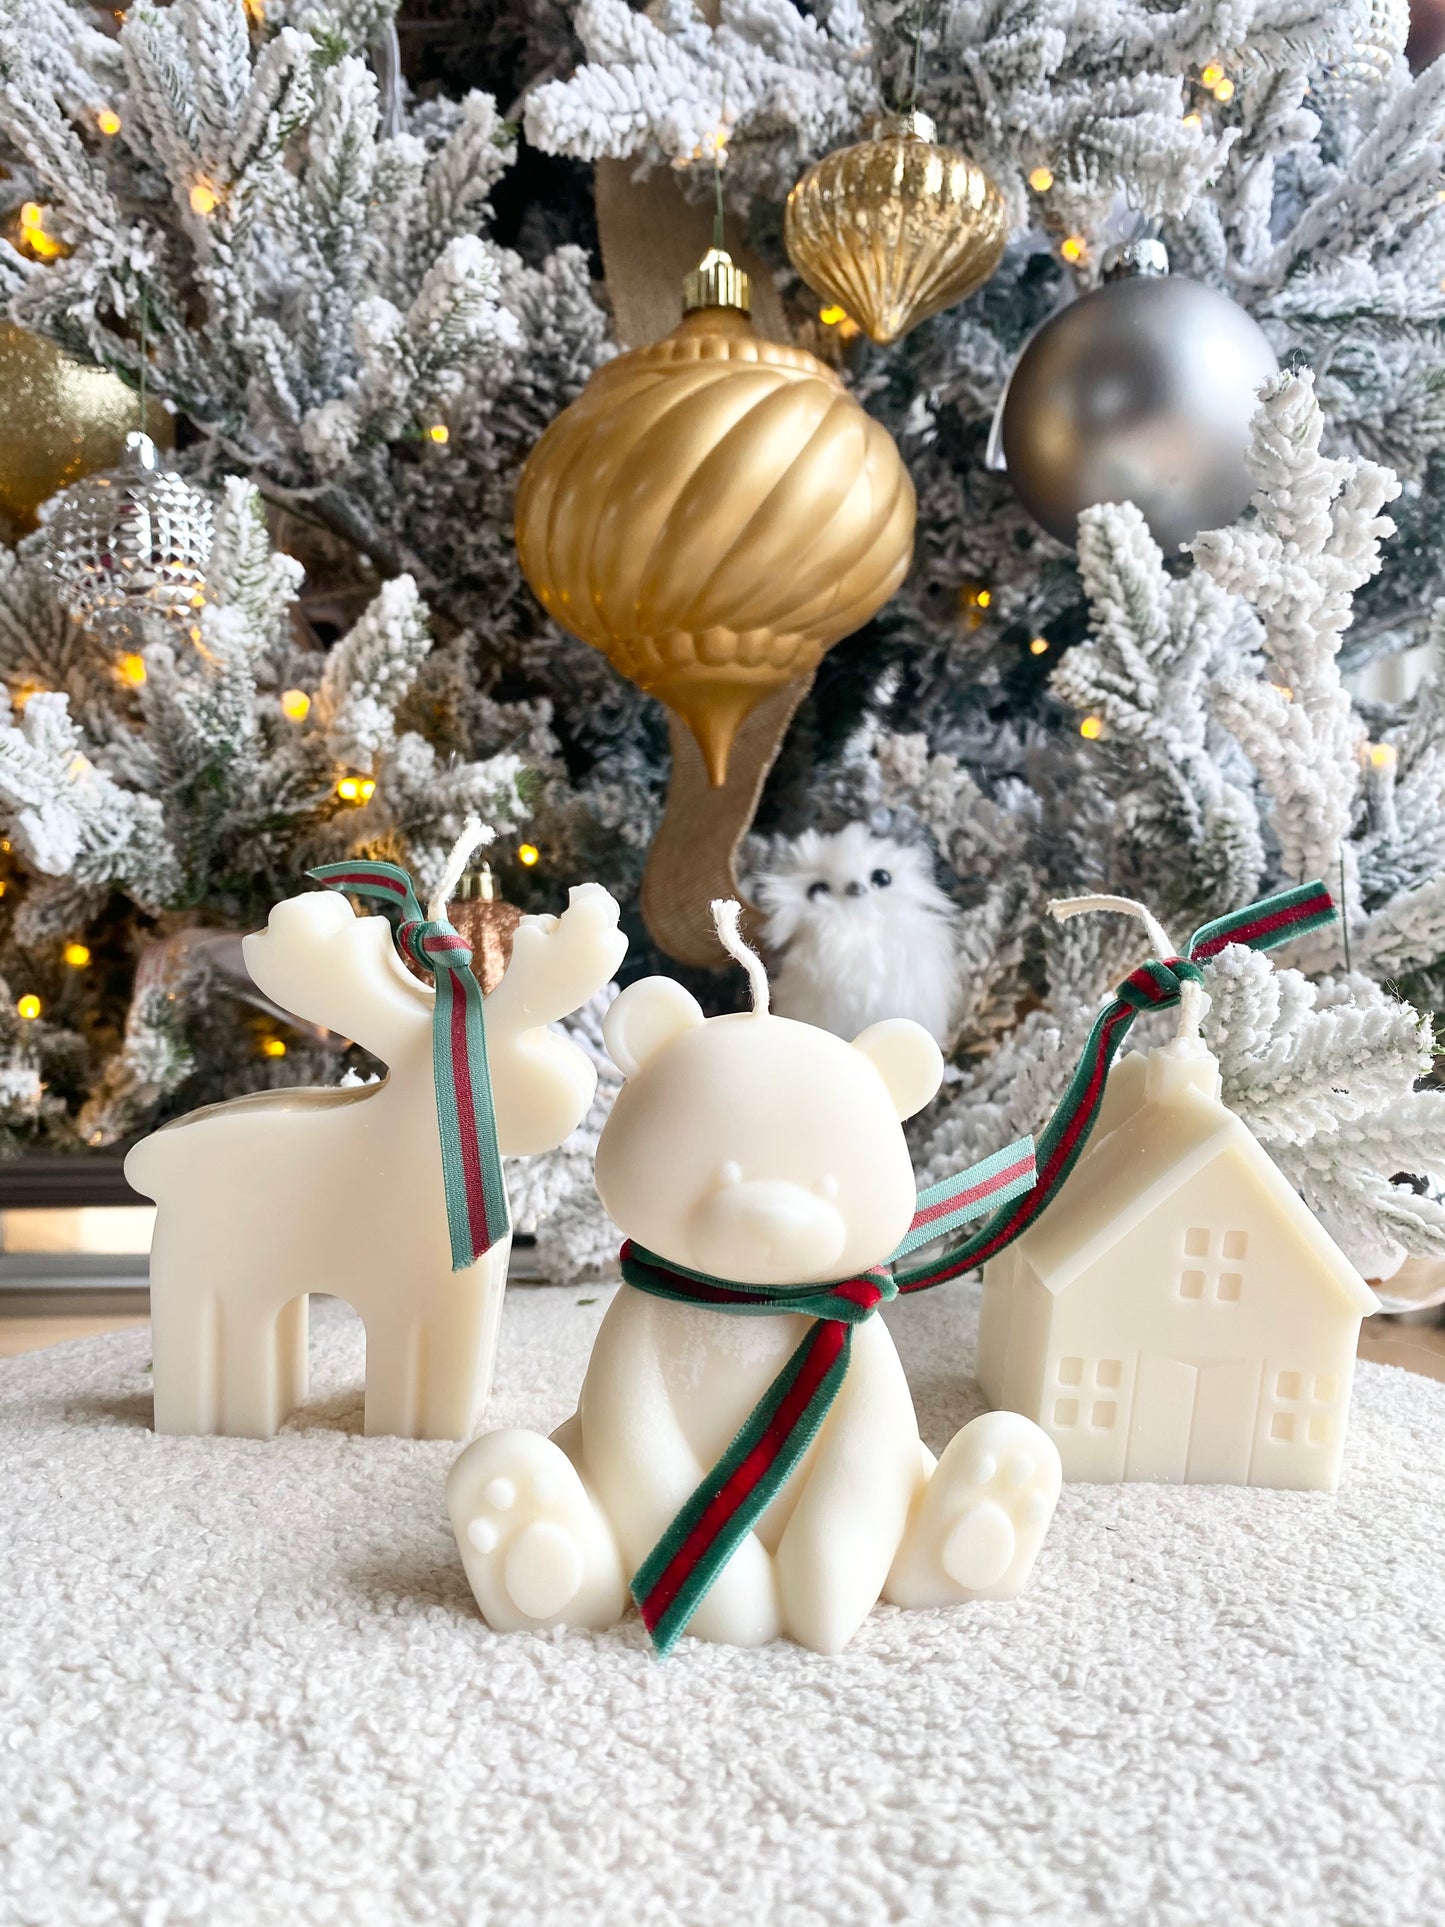 Cute Bear Candles Christmas Collection Gift for Her Decorative